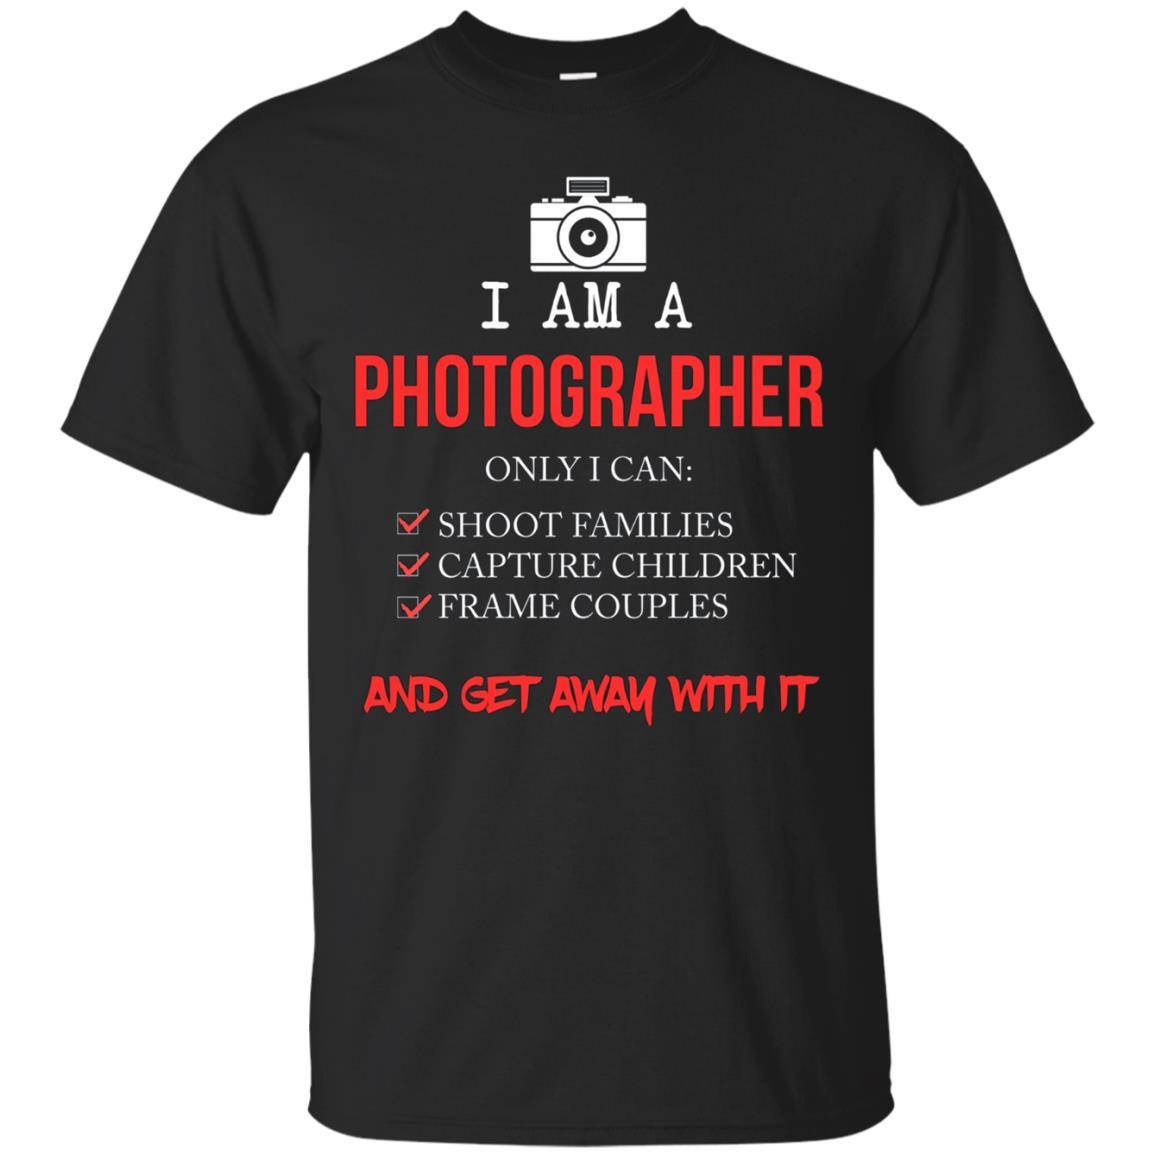 Cover Your Body With Amazing Funny I Am A Photographer T-shirt Cool Meme Camera Gift